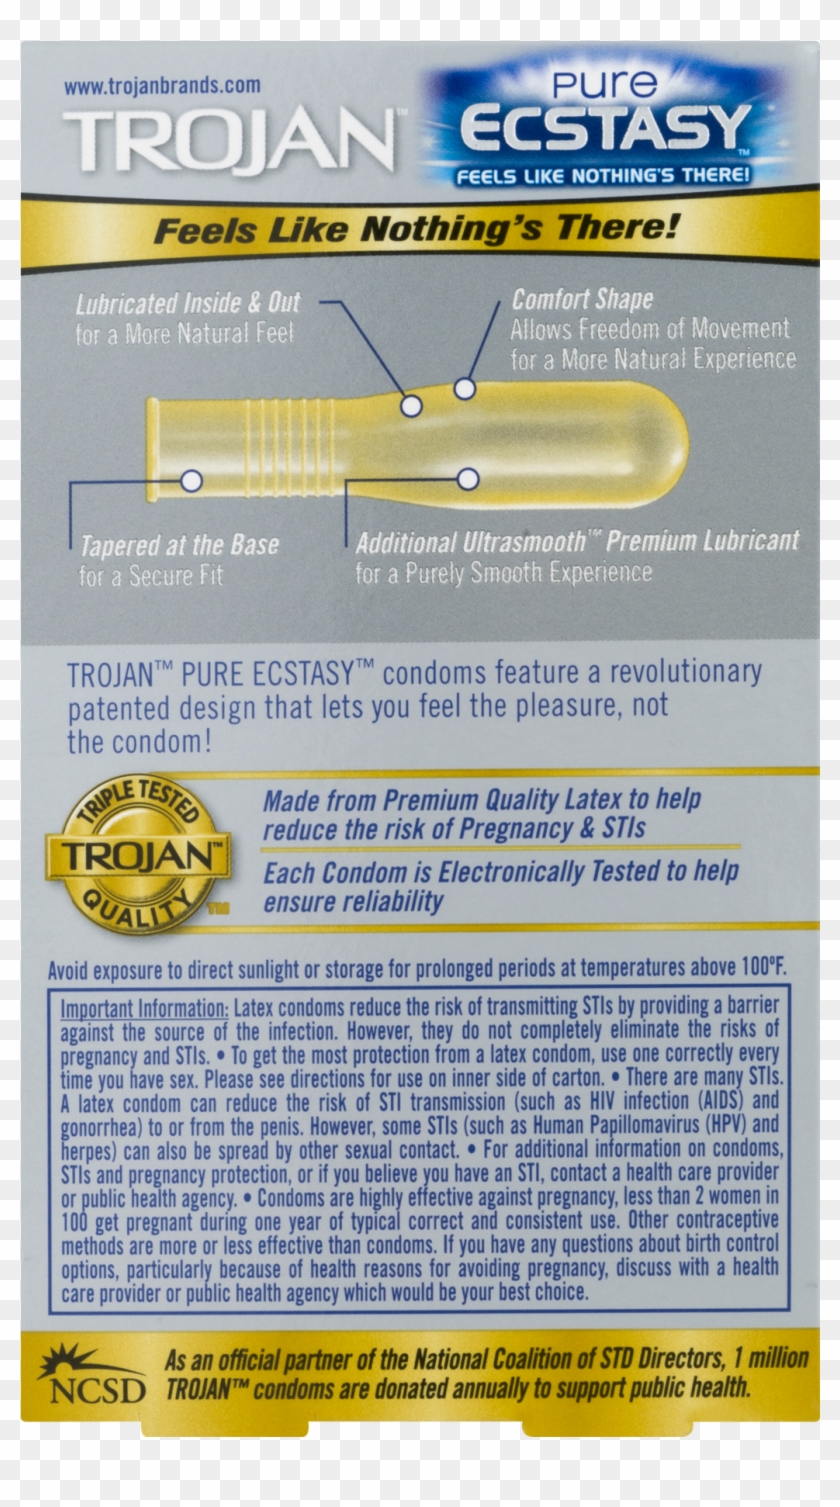 Trojan Pure Ecstacy Ultra Smooth Lubricated Latex Condoms - Boating Clipart #4776970